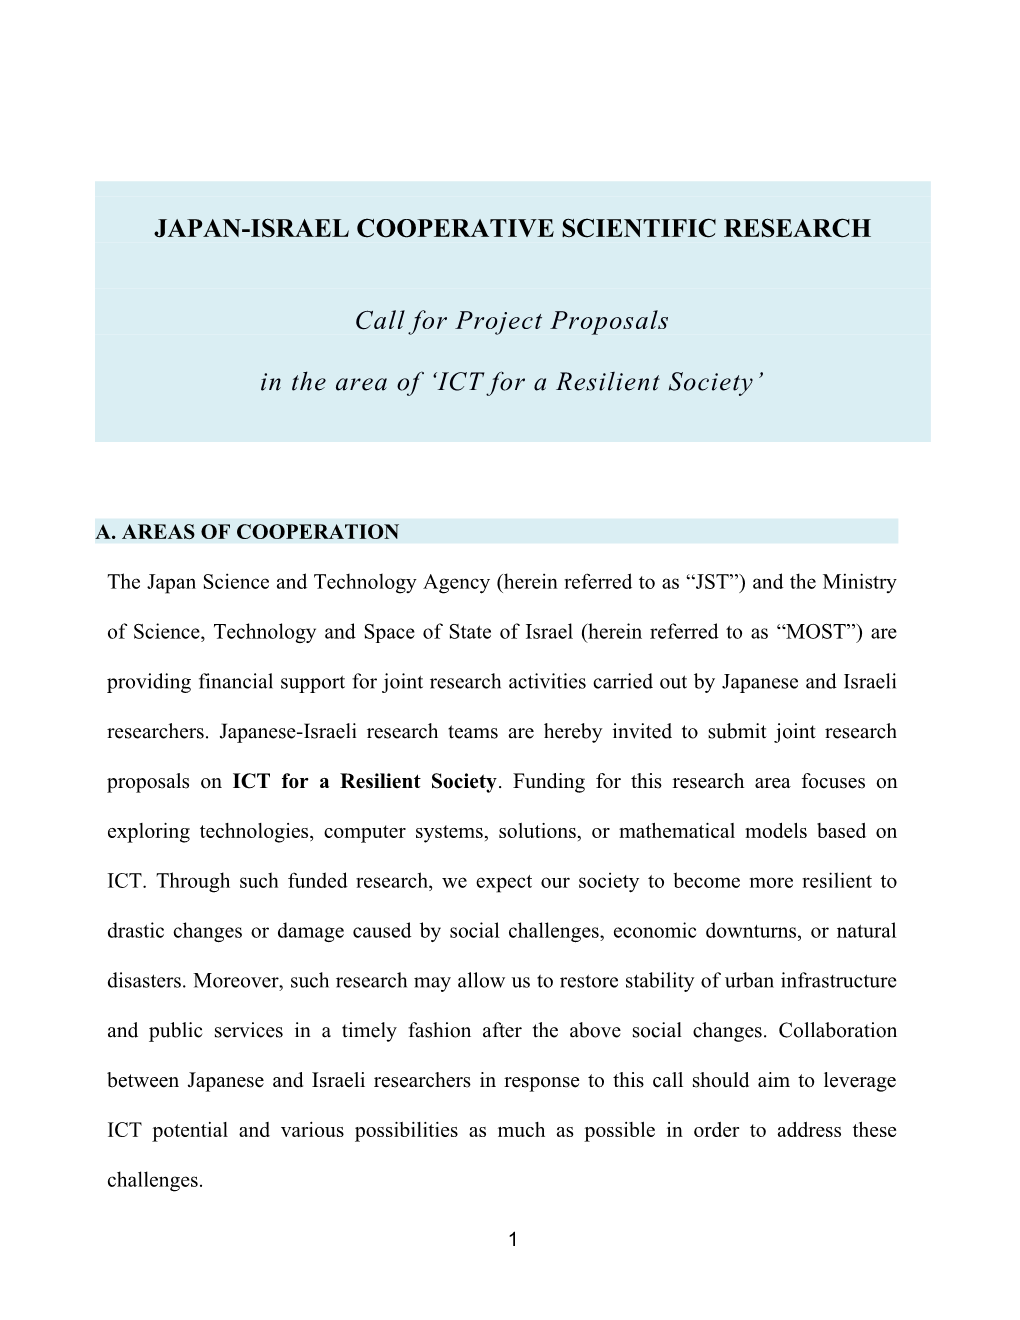 Call for Proposals-Japan-Israel 2016